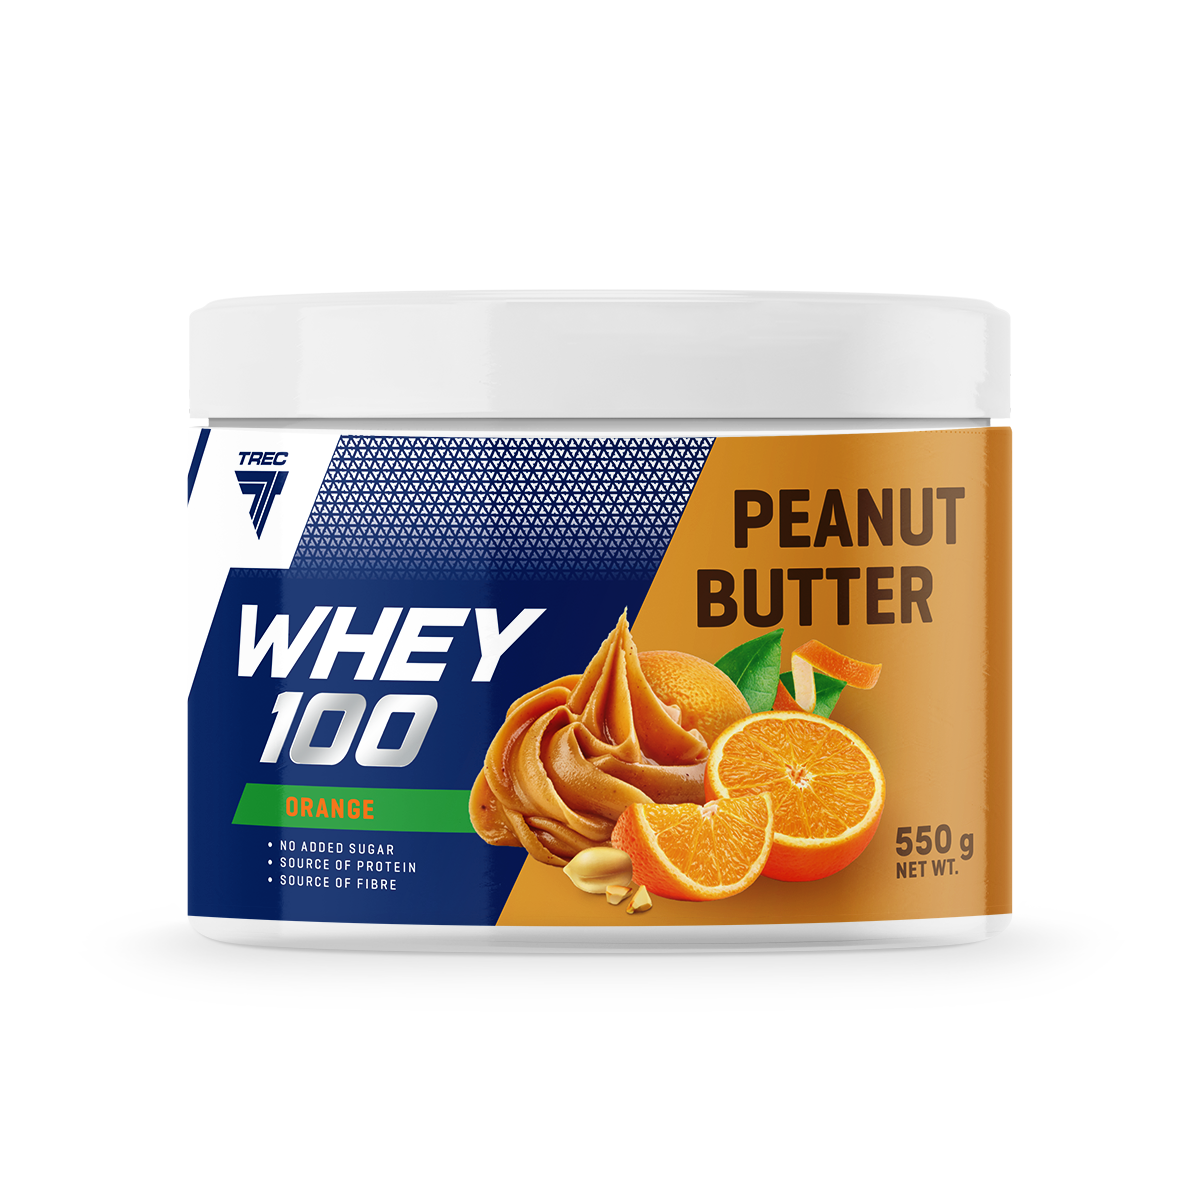 PEANUT BUTTER WHEY 100 - BBE DATE 02/24 –